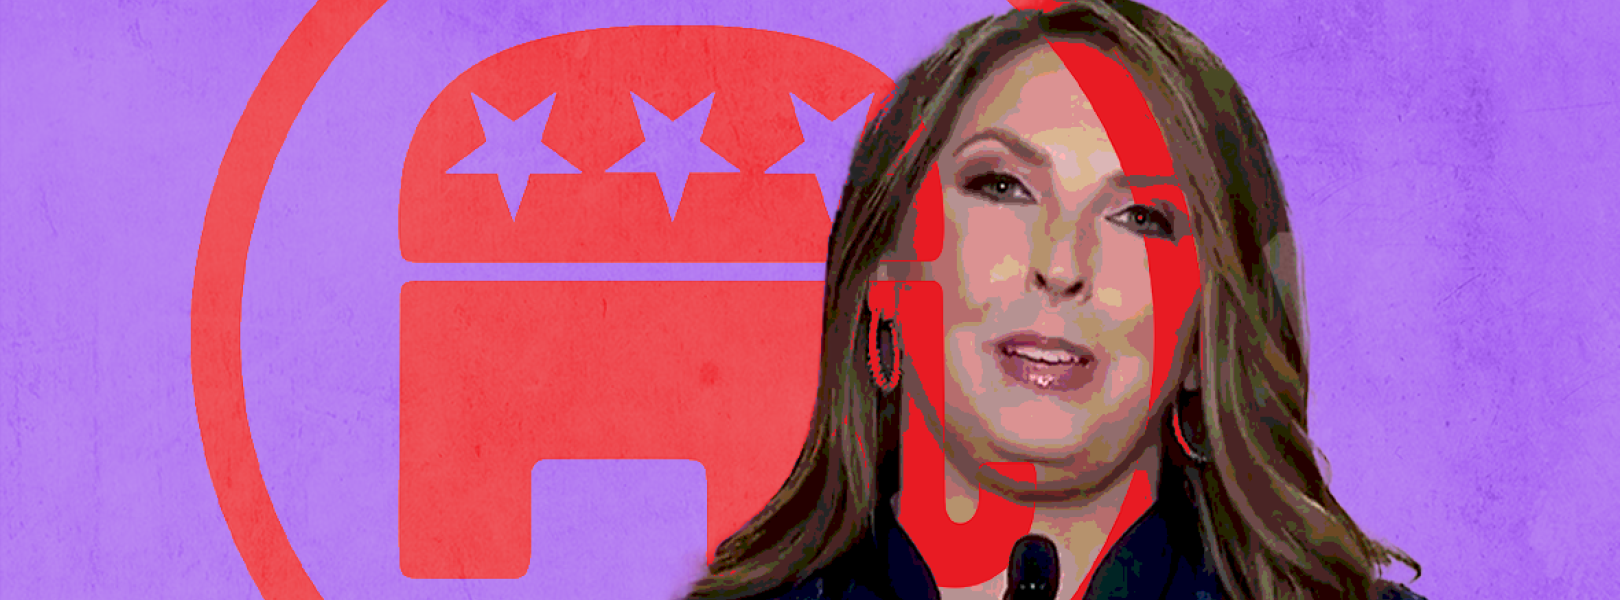 Ronna McDaniel offset to the right with a background GOP elephant logo partially superimposed over her face, against a purple background